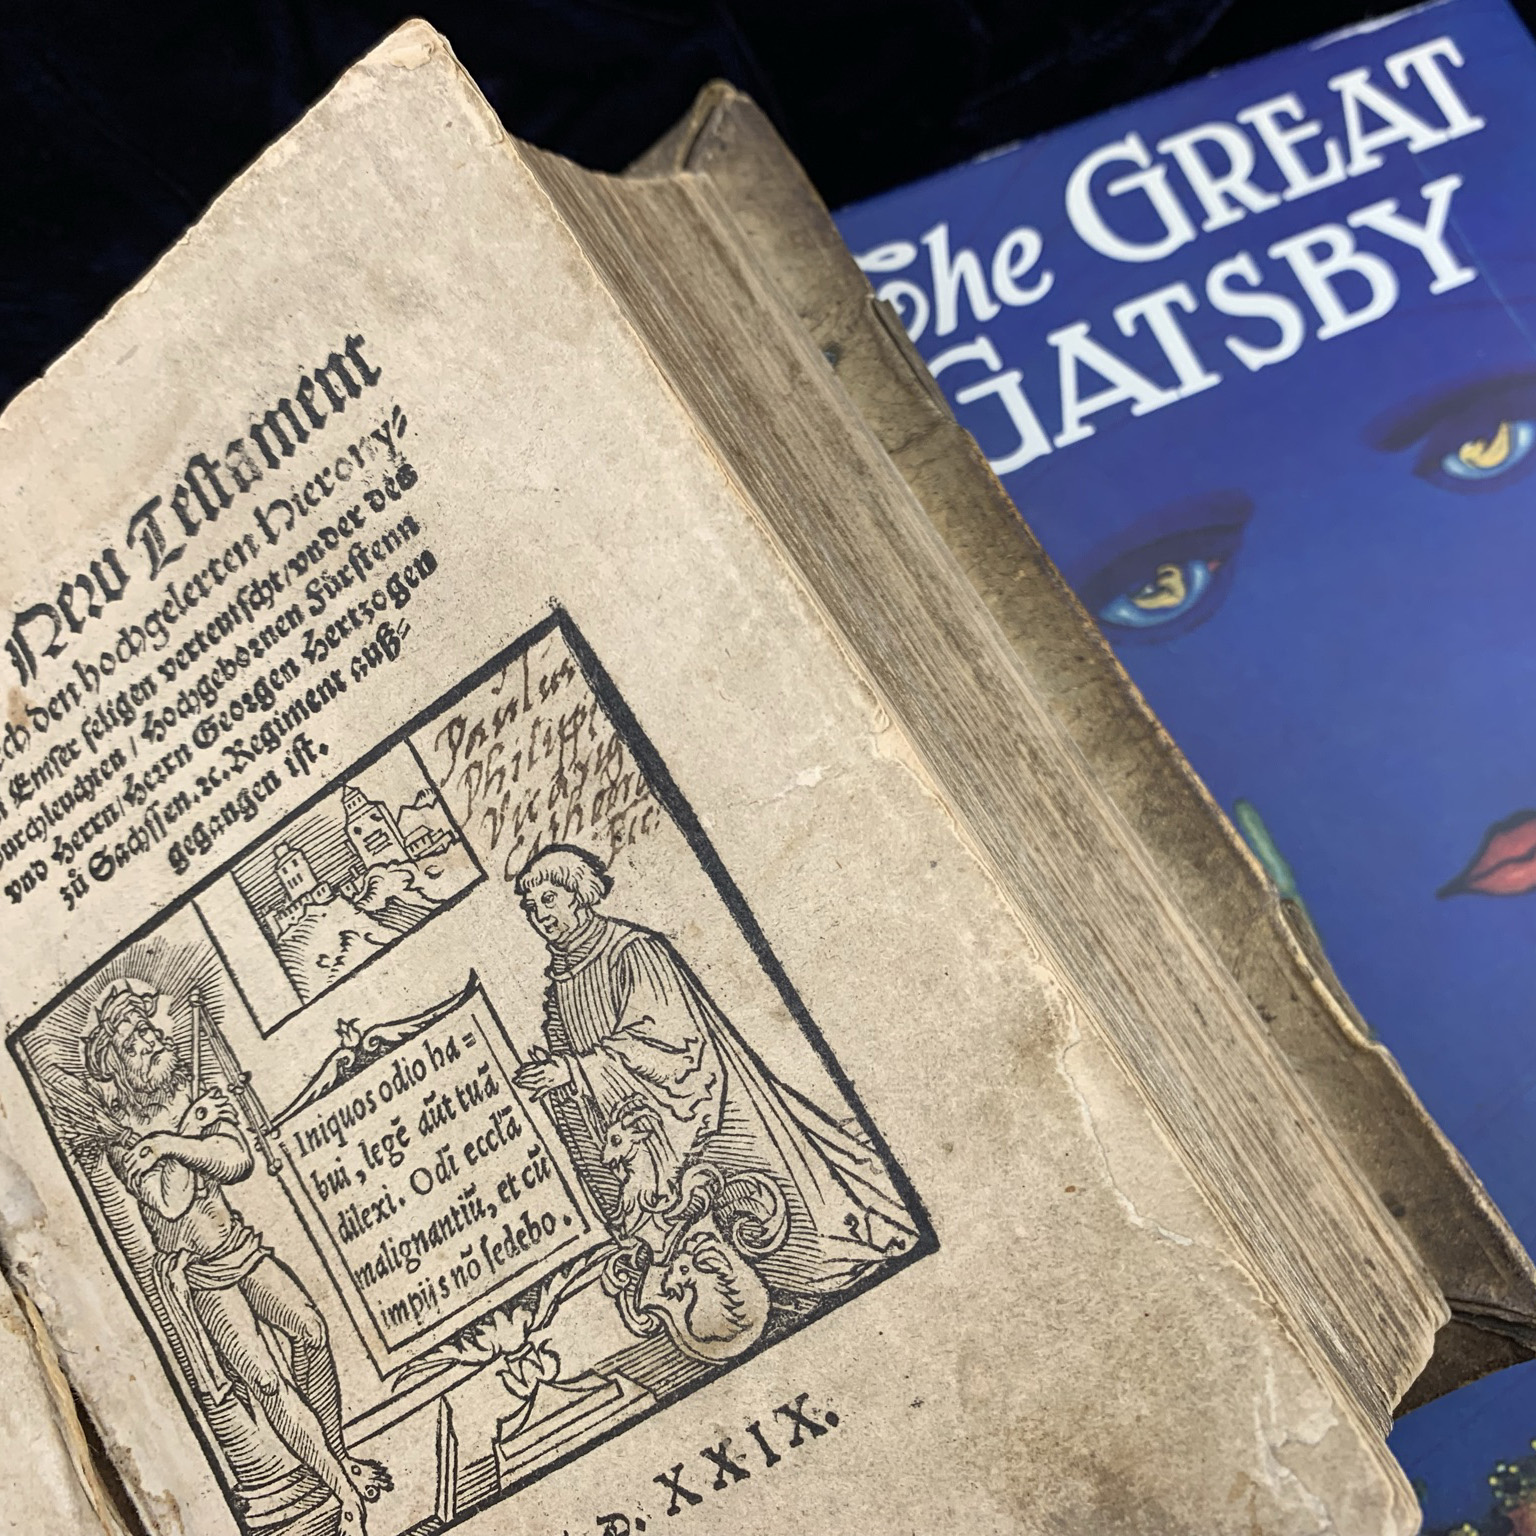 Two rare books are featured. One is a 1620s German New Testament and the other is a 1920s edition of The Great Gatsby.